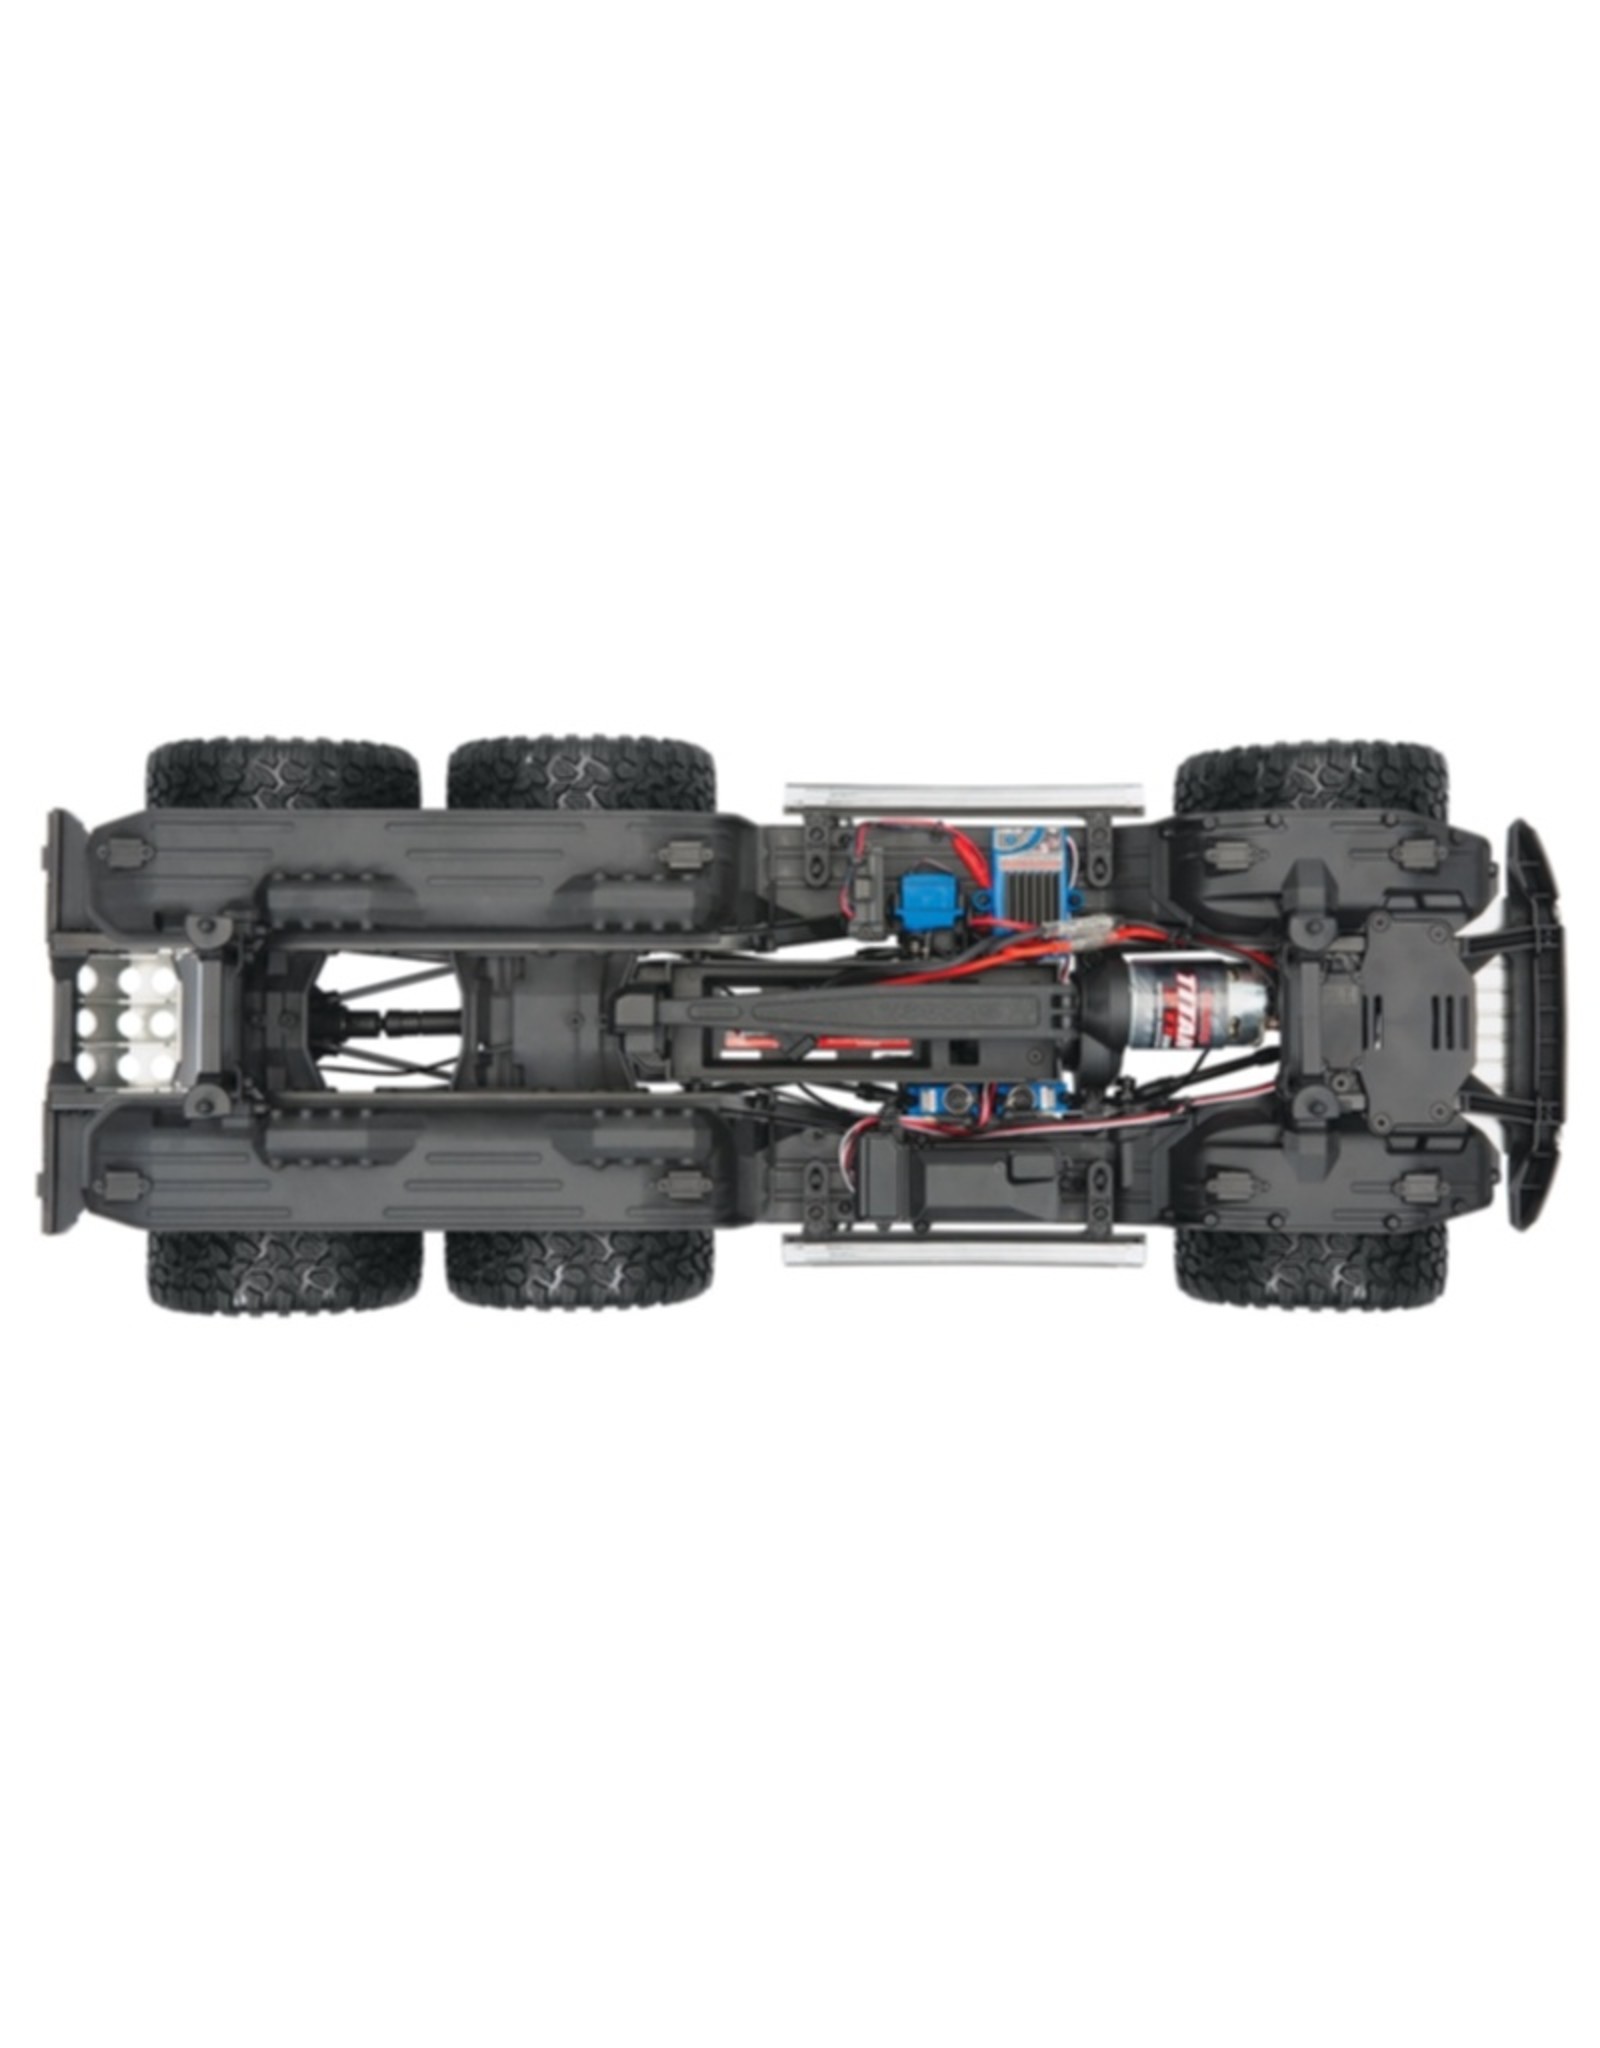 Traxxas TRA88096-4 BLACK TRX-6™ Scale and Trail™  Crawler with Mercedes-Benz® G 63® AMG Body: 1/10 Scale 6X6 Electric Trail Truck. Ready-to-Drive® with TQi Traxxas Link™ Enabled 2.4GHz Radio System, XL-5 HV ESC (fwd/rev), and Titan® 550 motor.